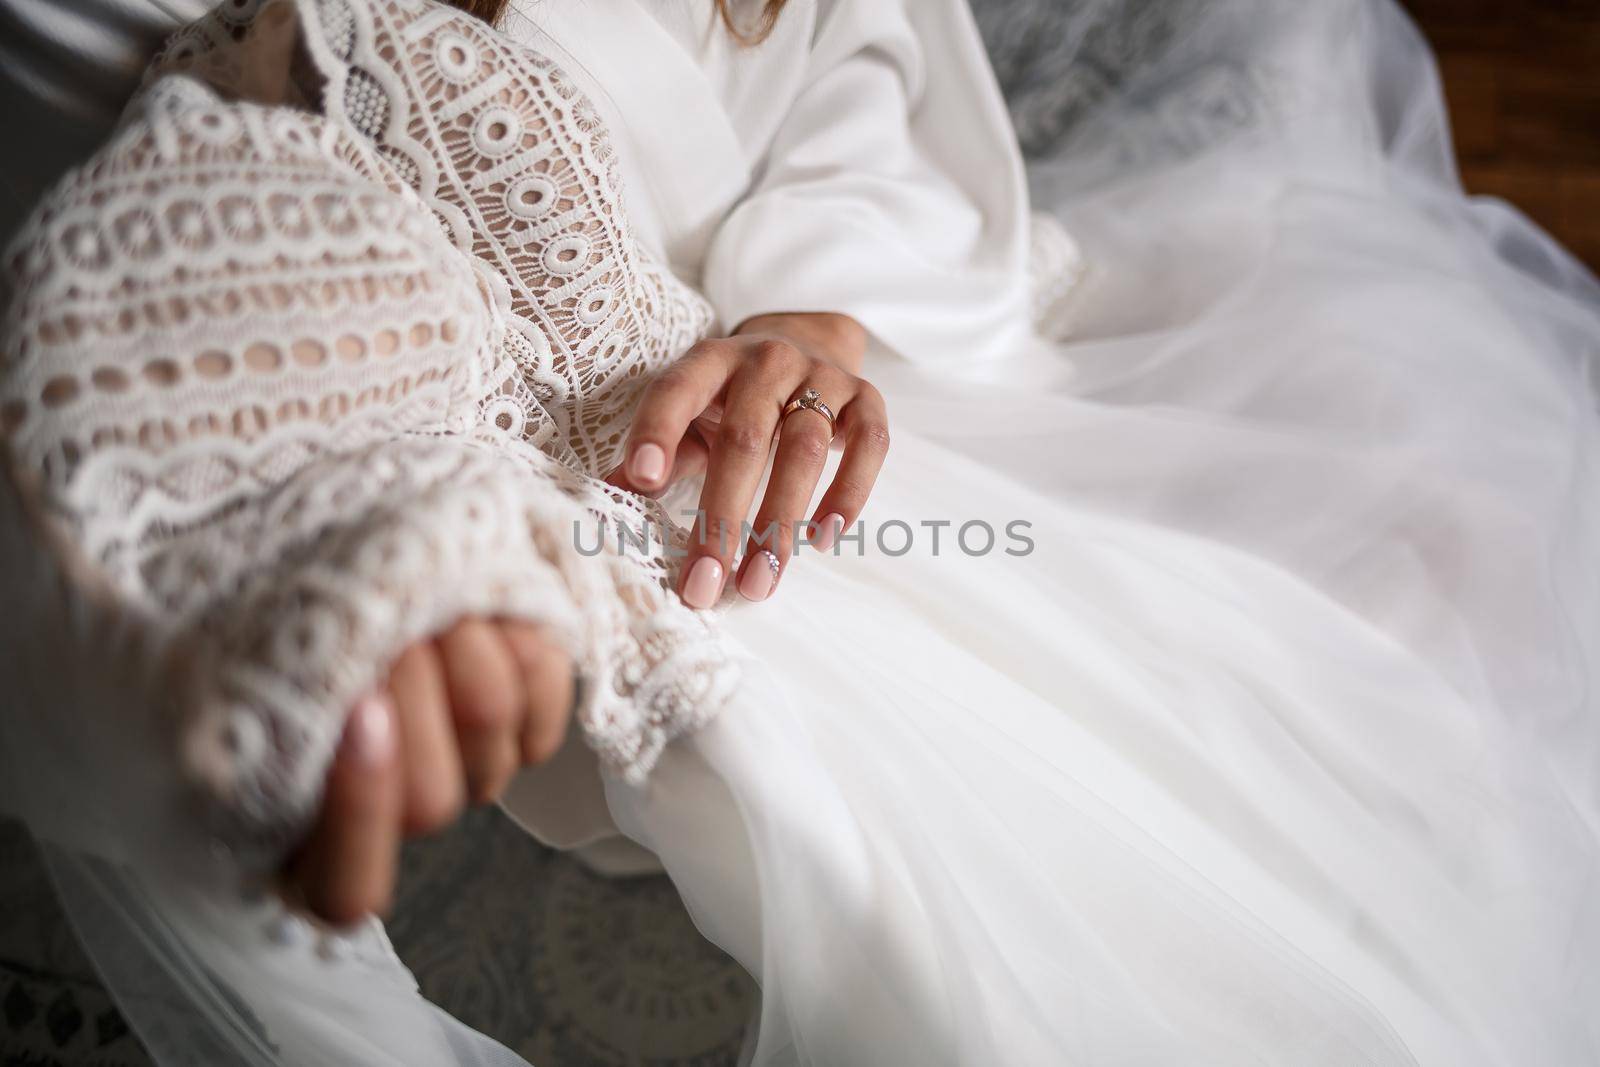 The bride holds a white dress in her hands on the wedding day. by Dmitrytph